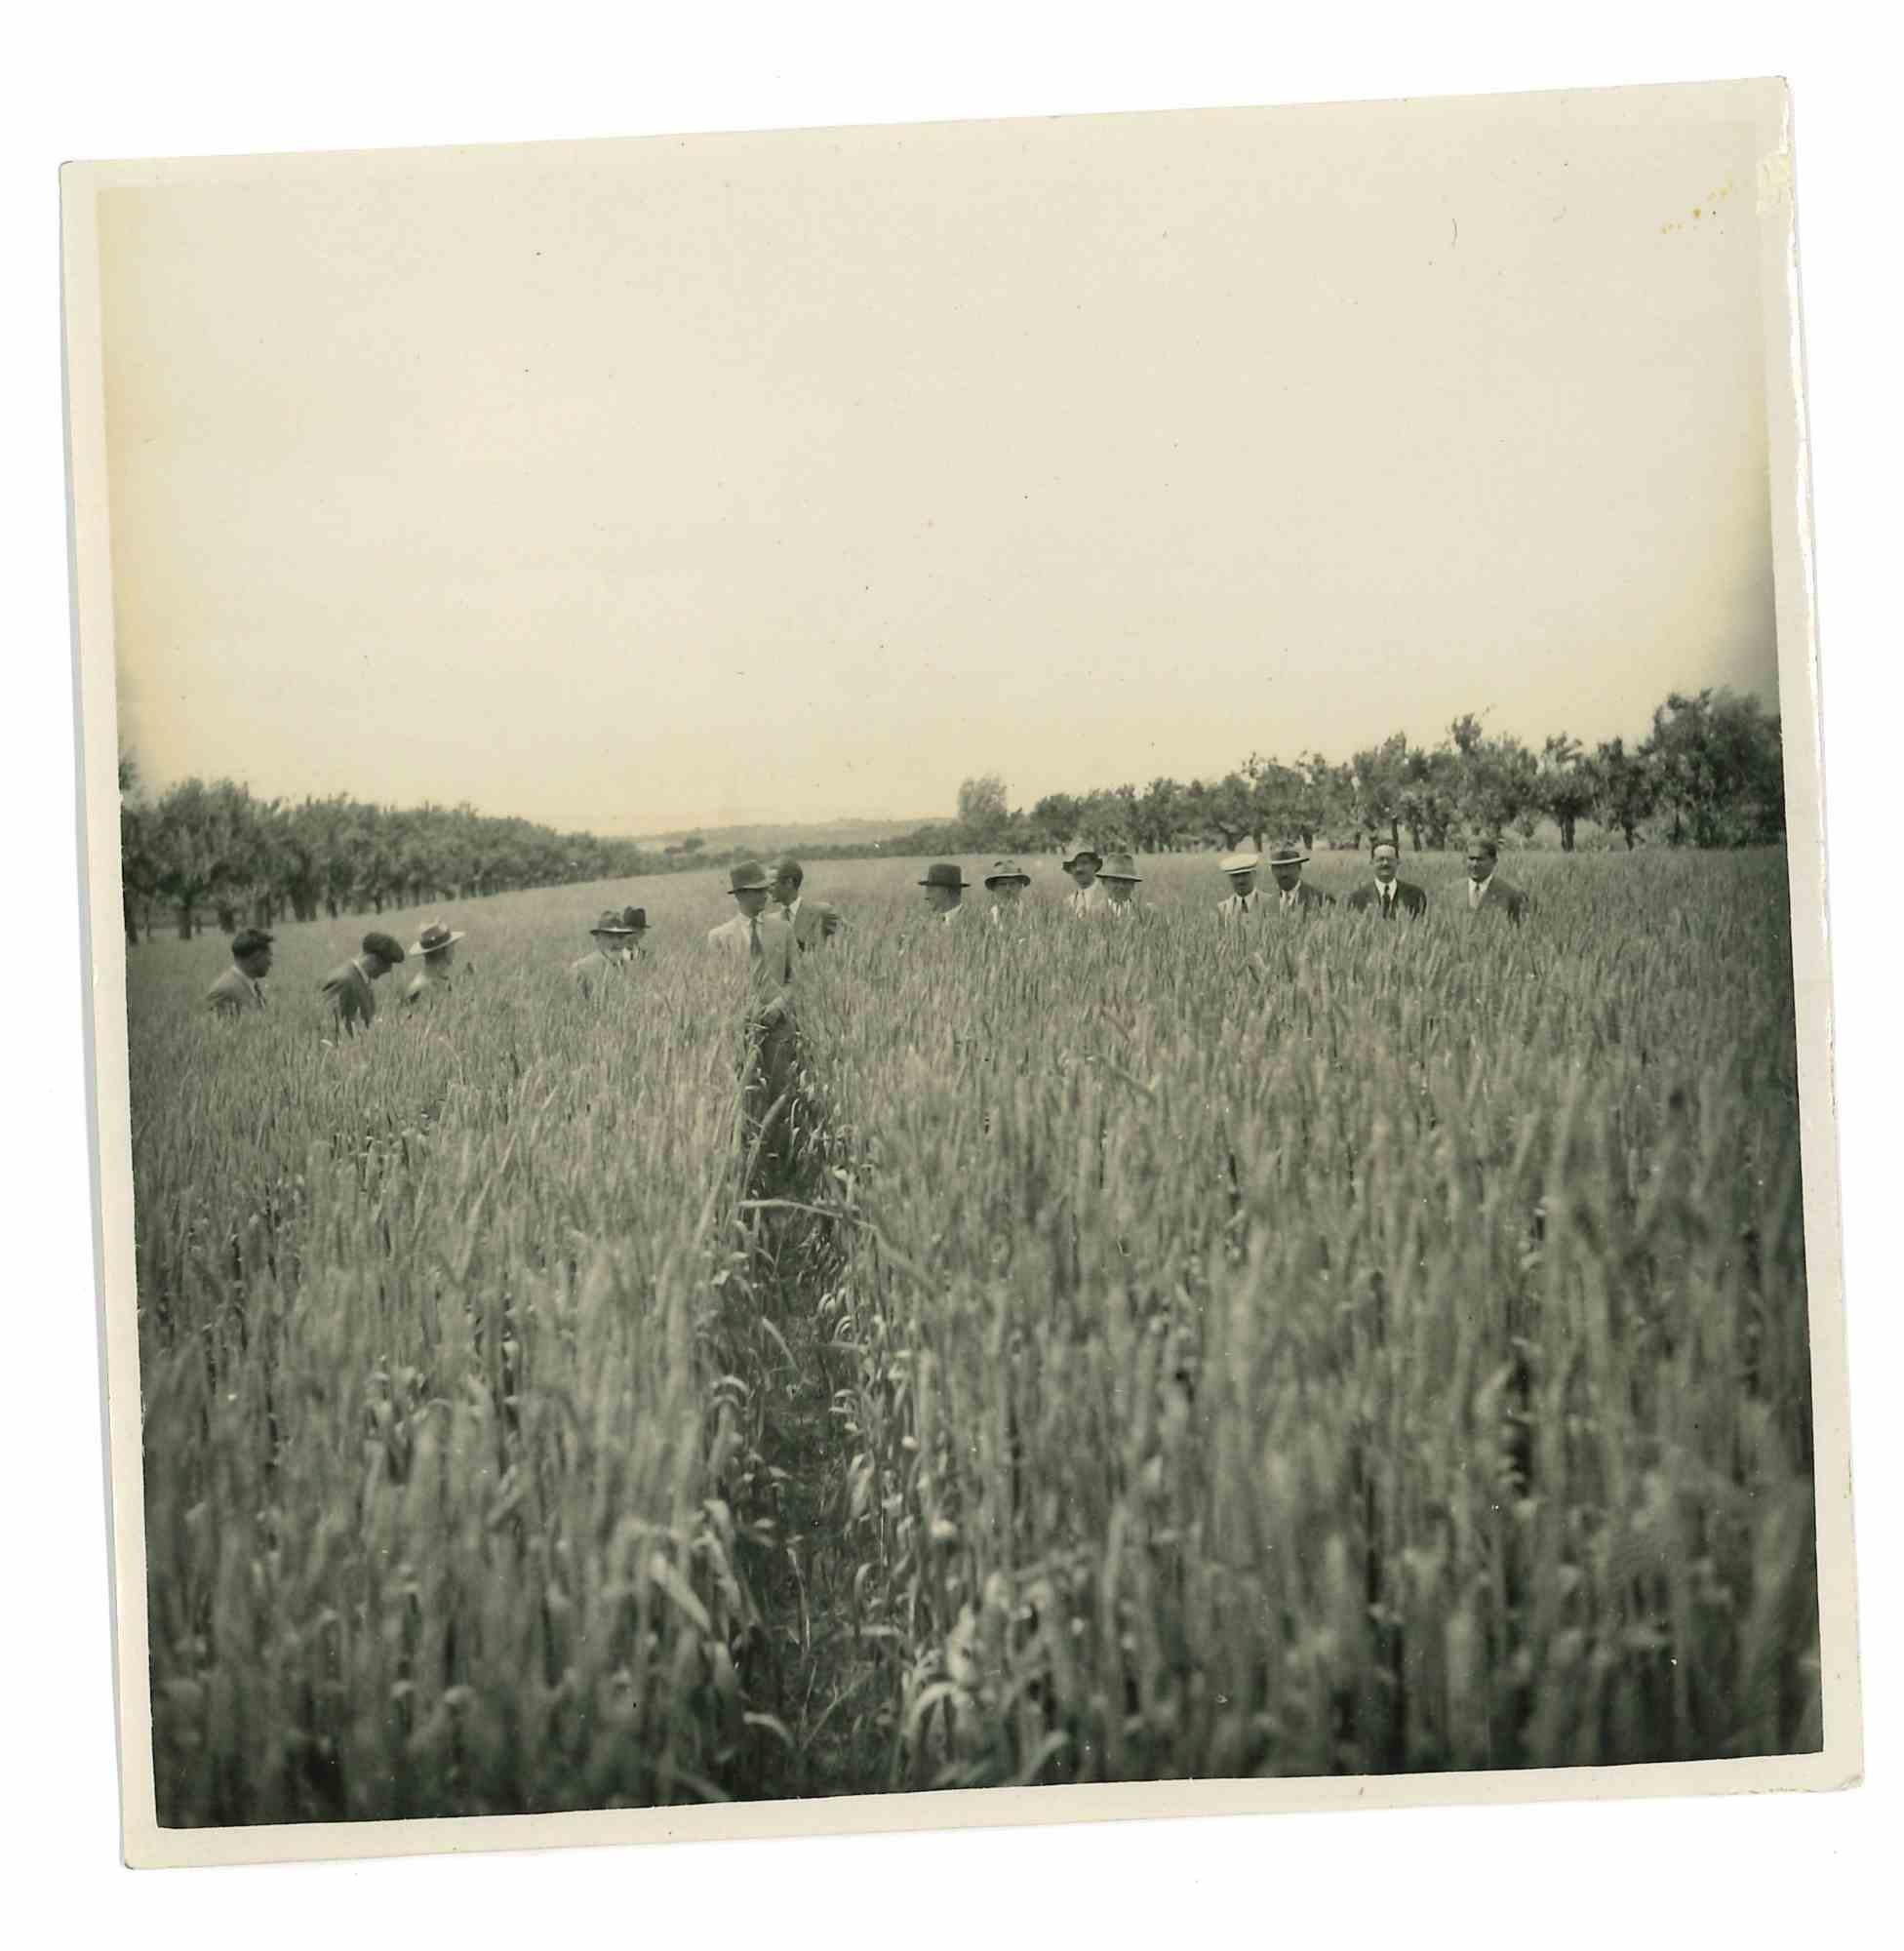 Unknown Portrait Photograph - The Old Days - Men in Field - Early 20th Century